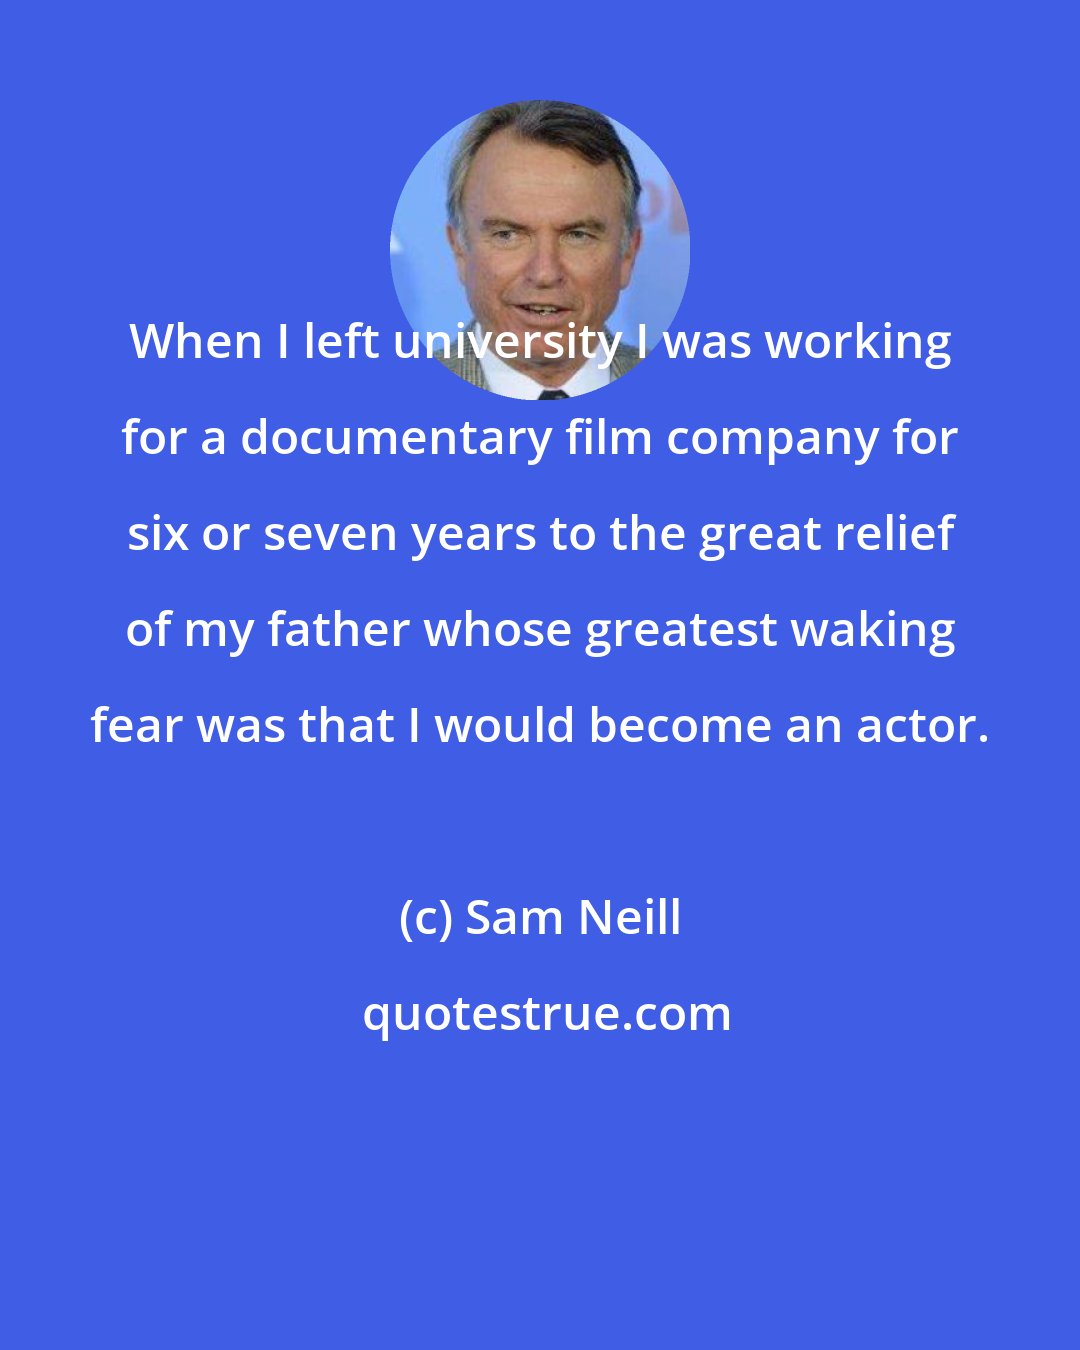 Sam Neill: When I left university I was working for a documentary film company for six or seven years to the great relief of my father whose greatest waking fear was that I would become an actor.